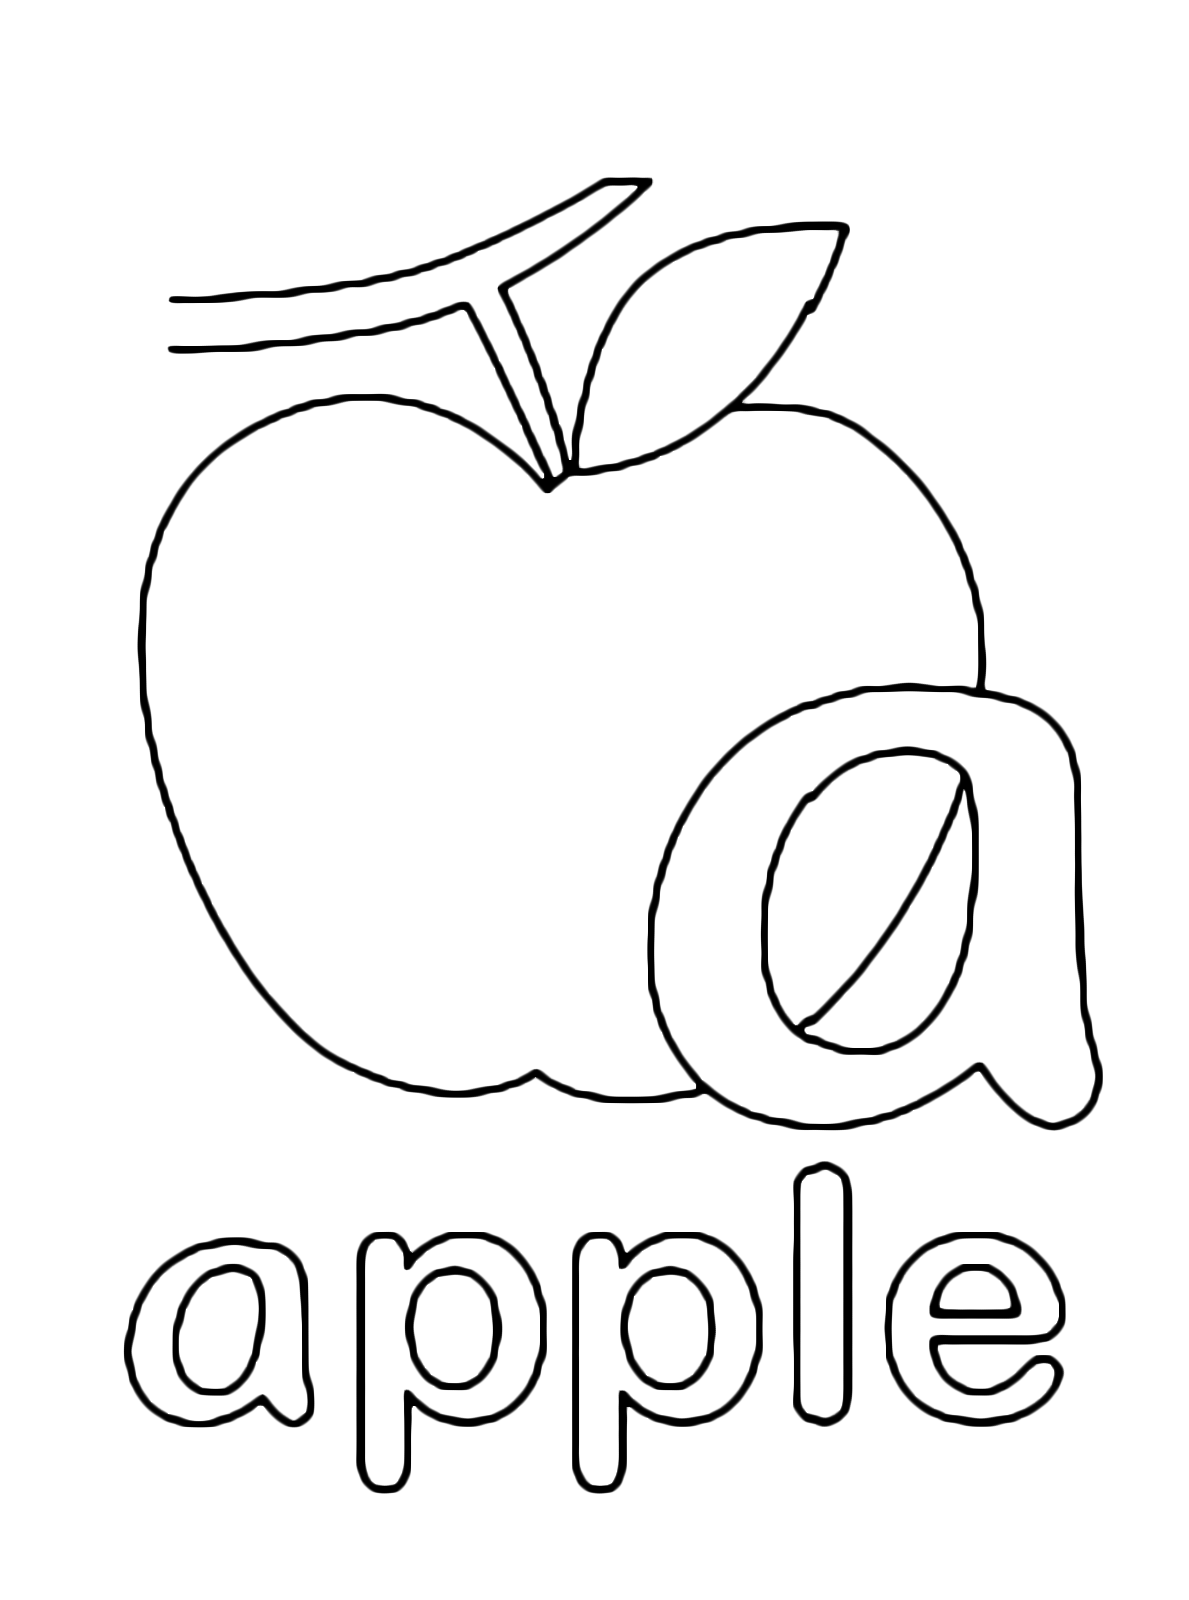 Letters and numbers a for apple lowercase letter